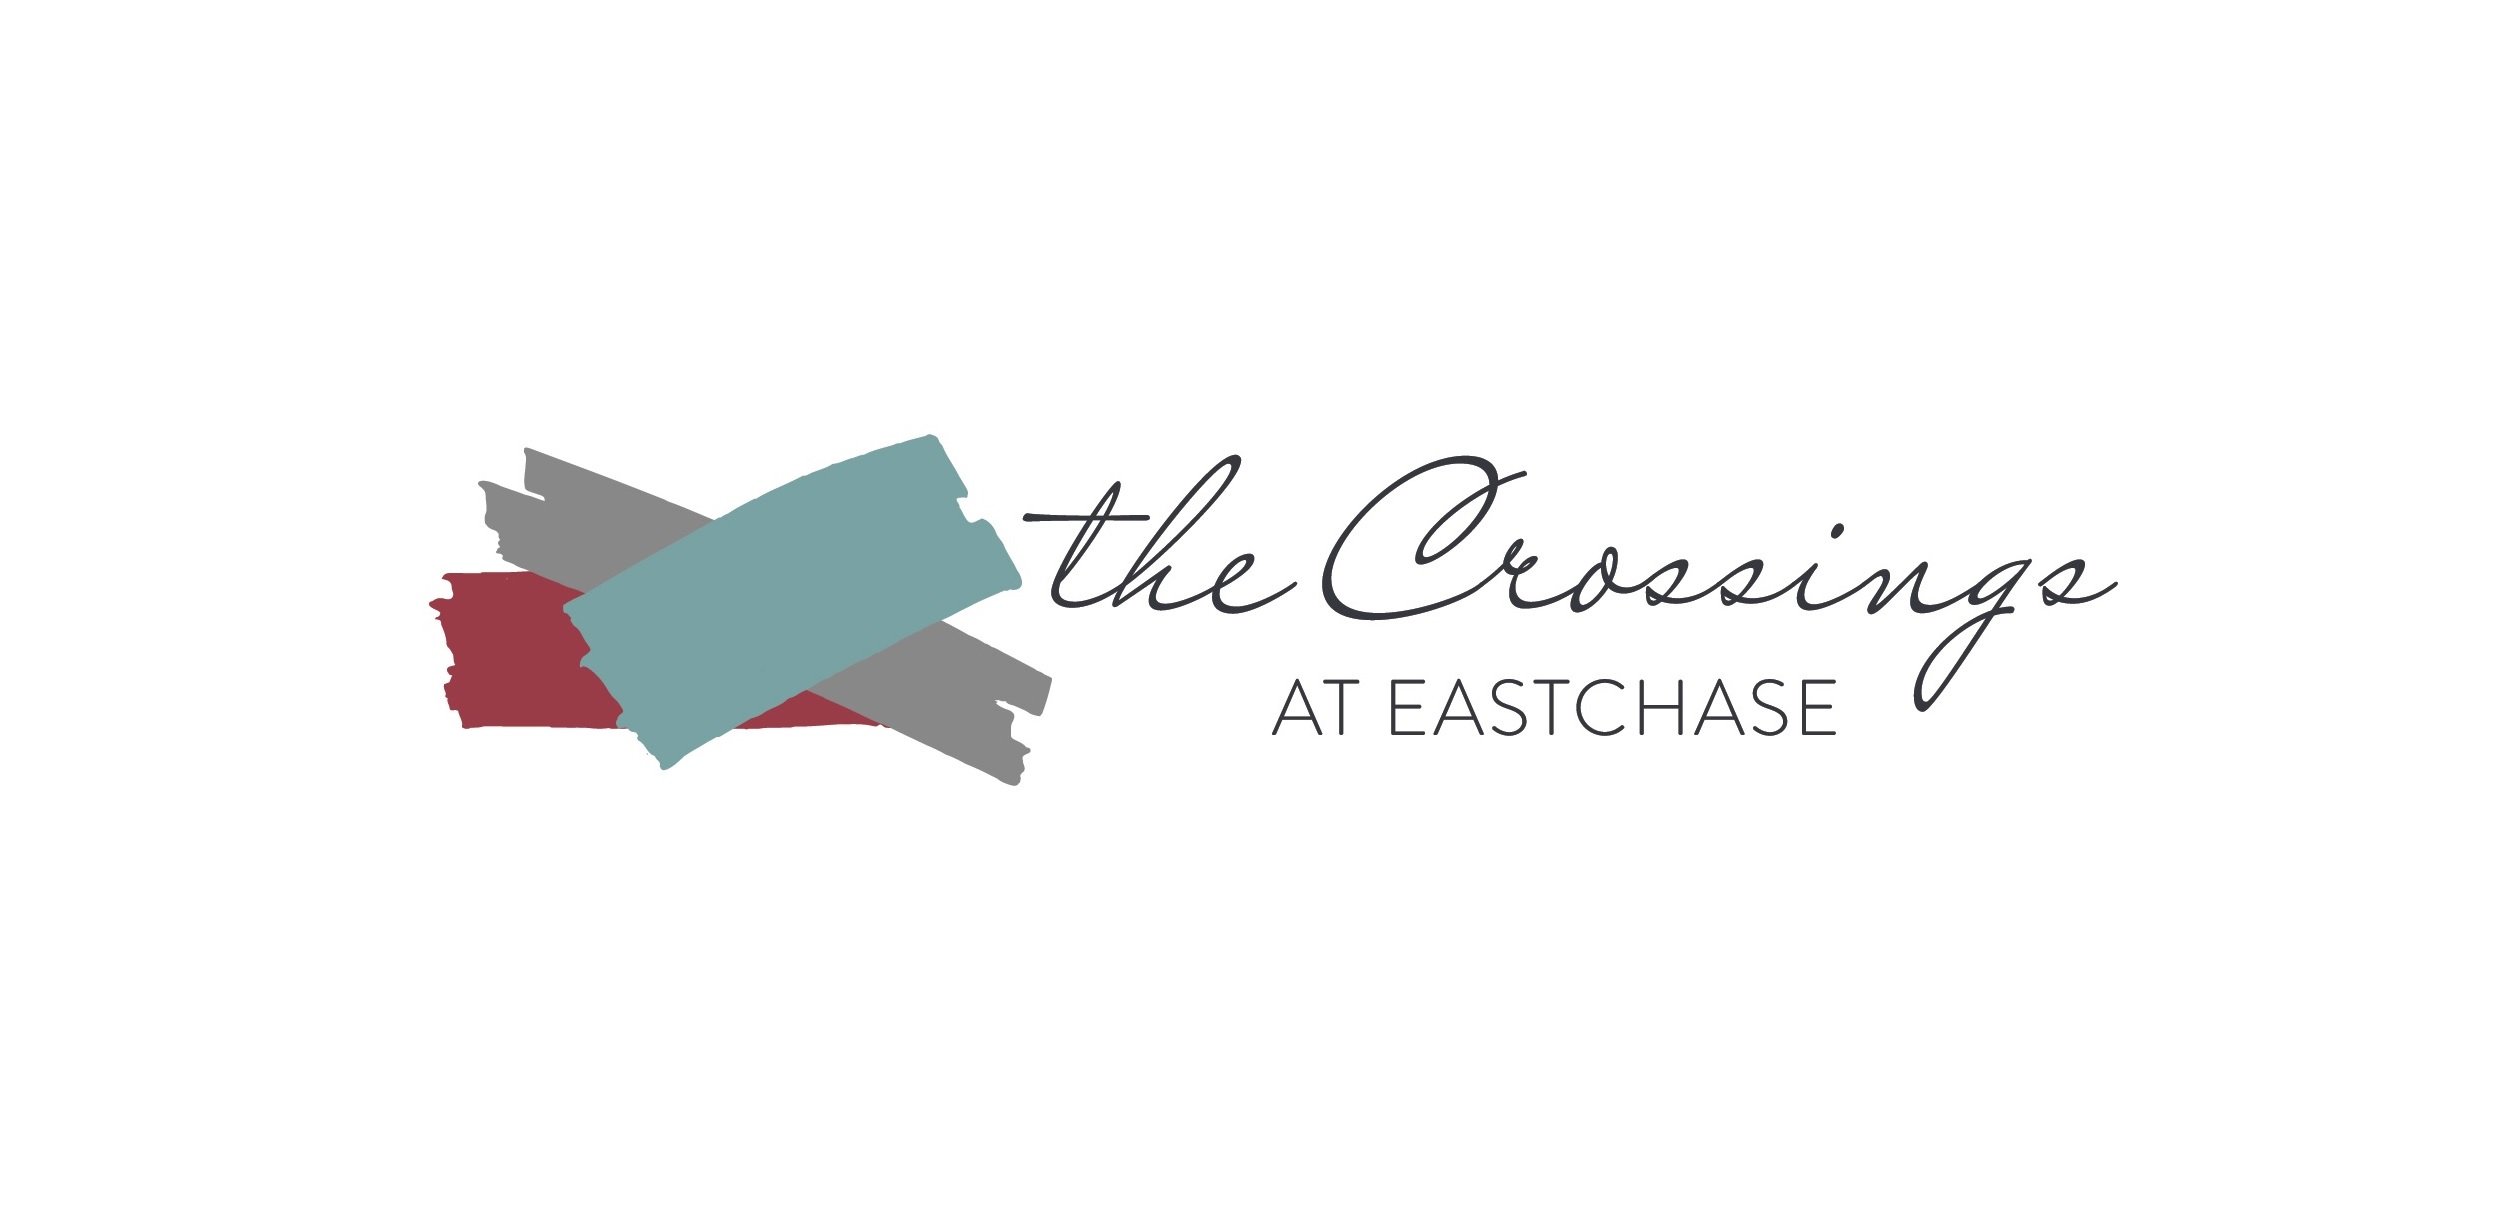 The Crossings at Eastchase image